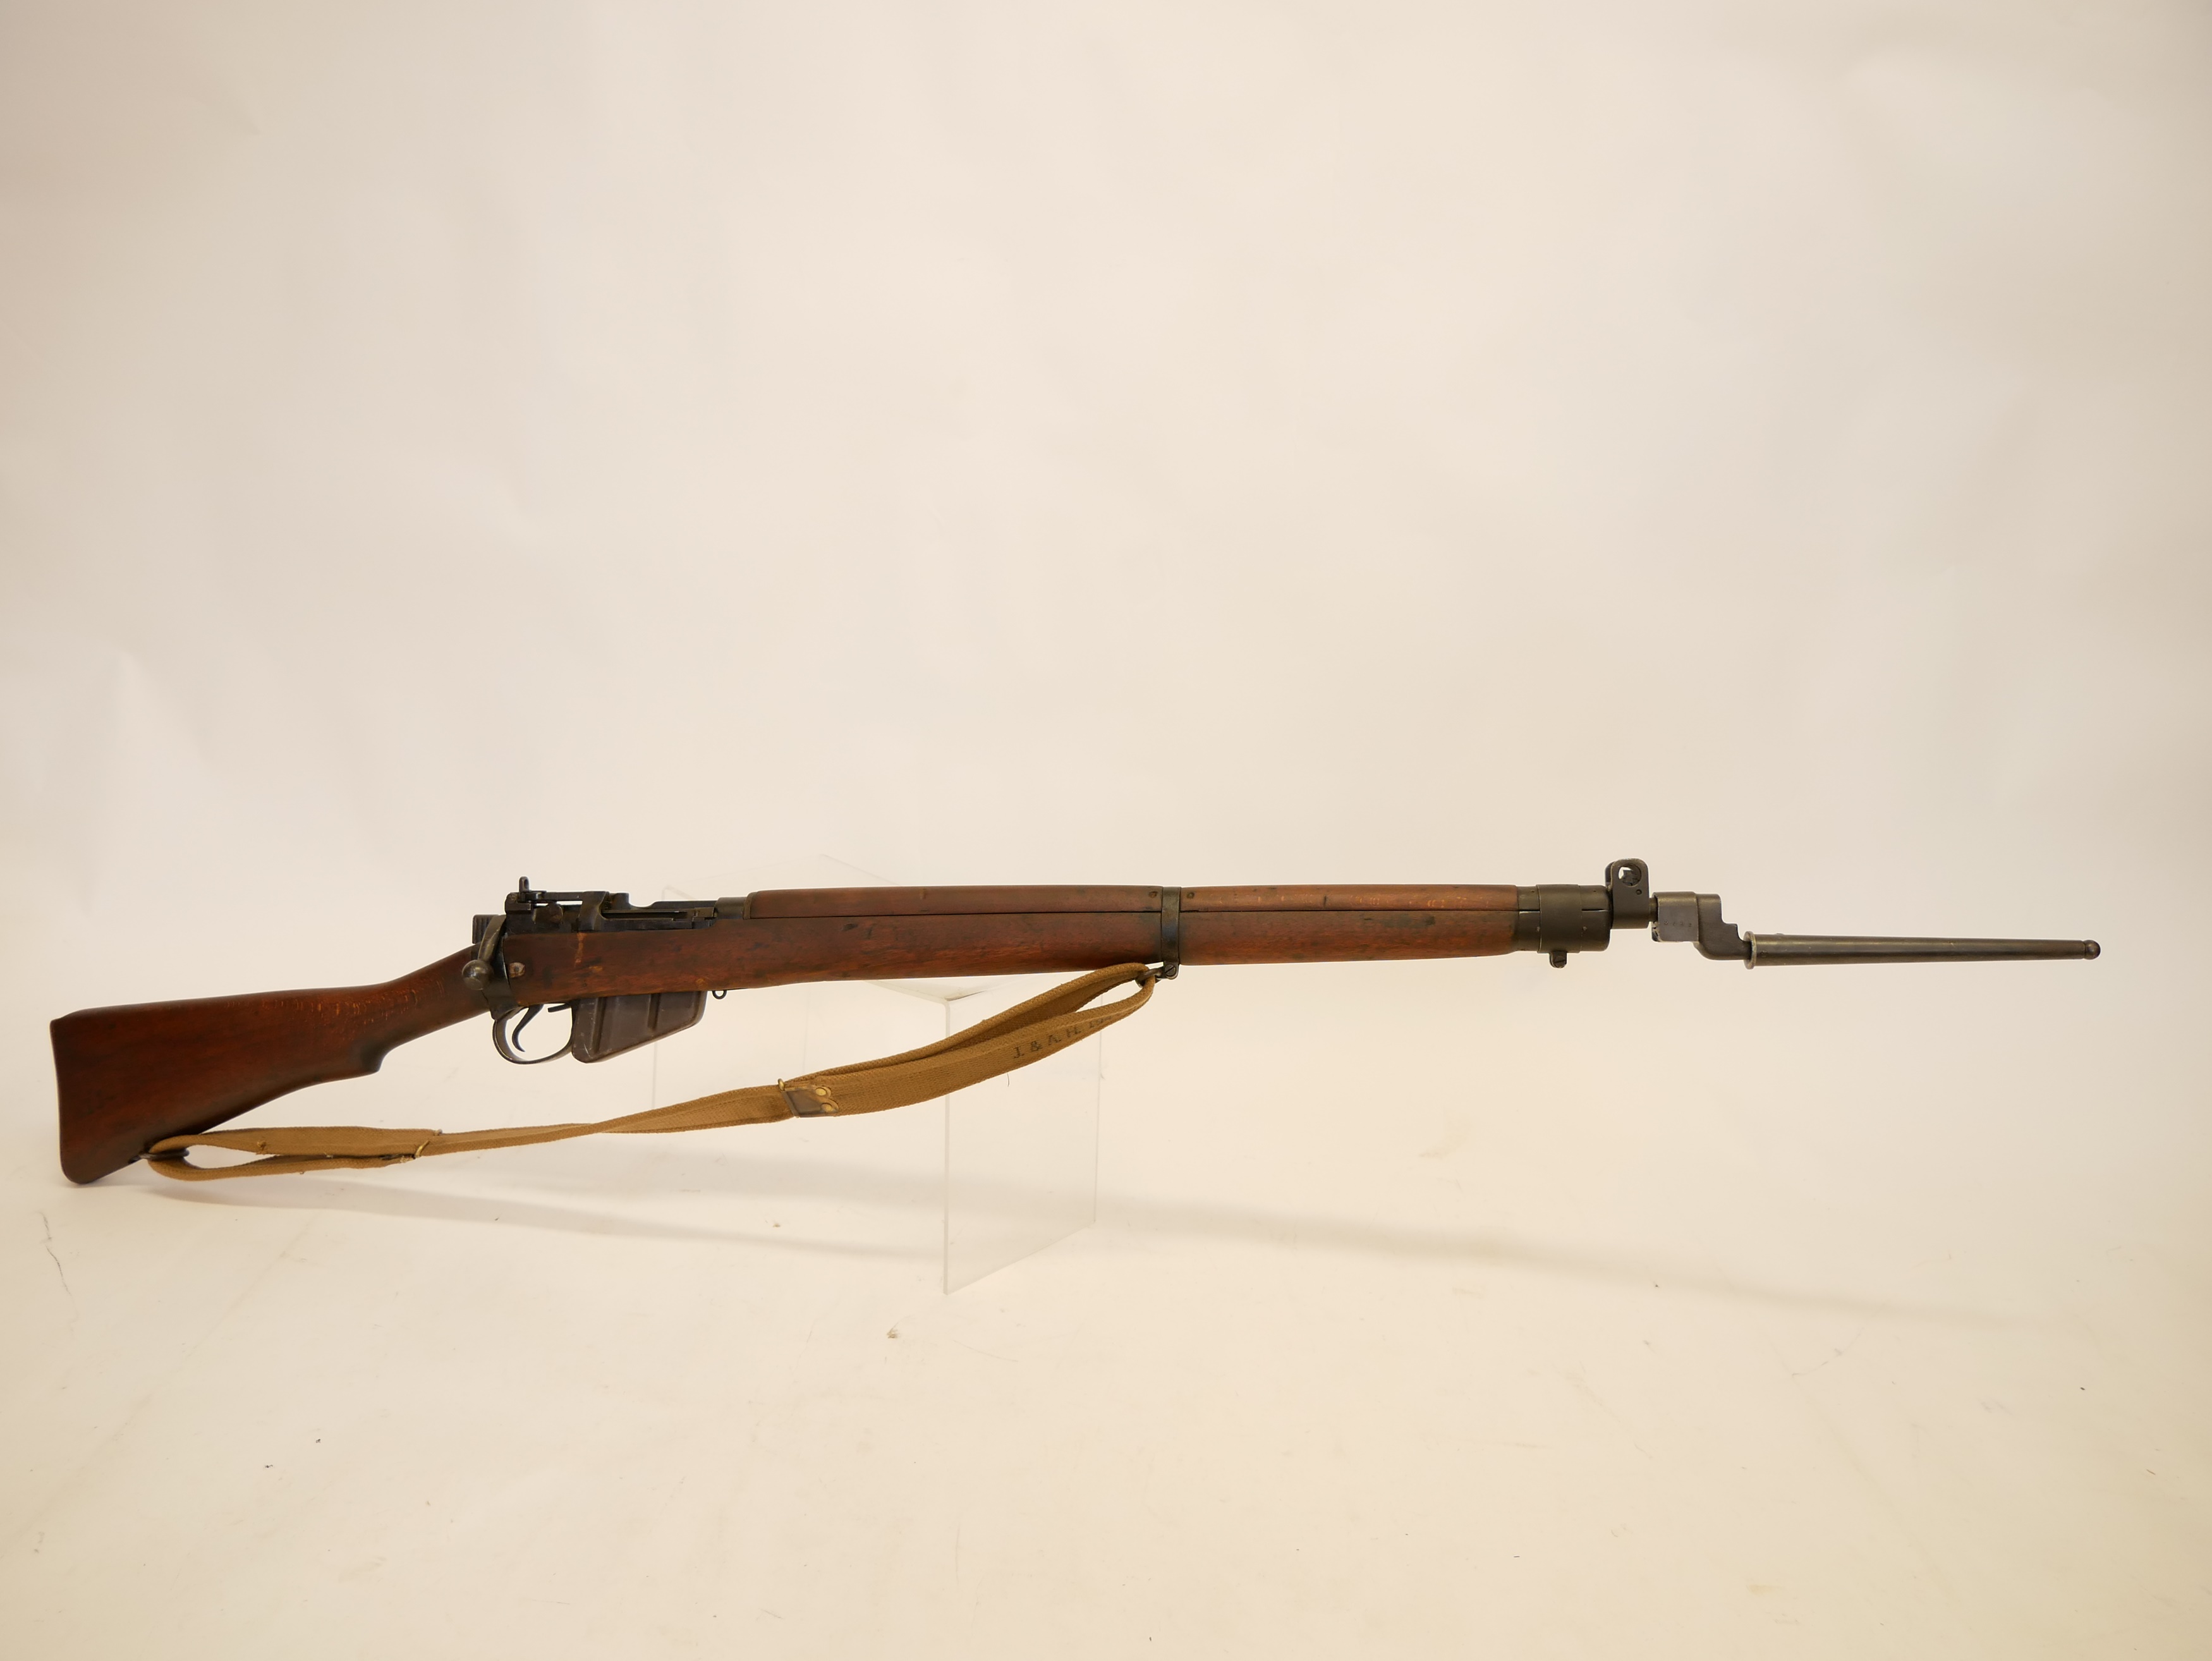 Deactivated Lee-Enfield rifle no4 mk1 British made 1944 dated